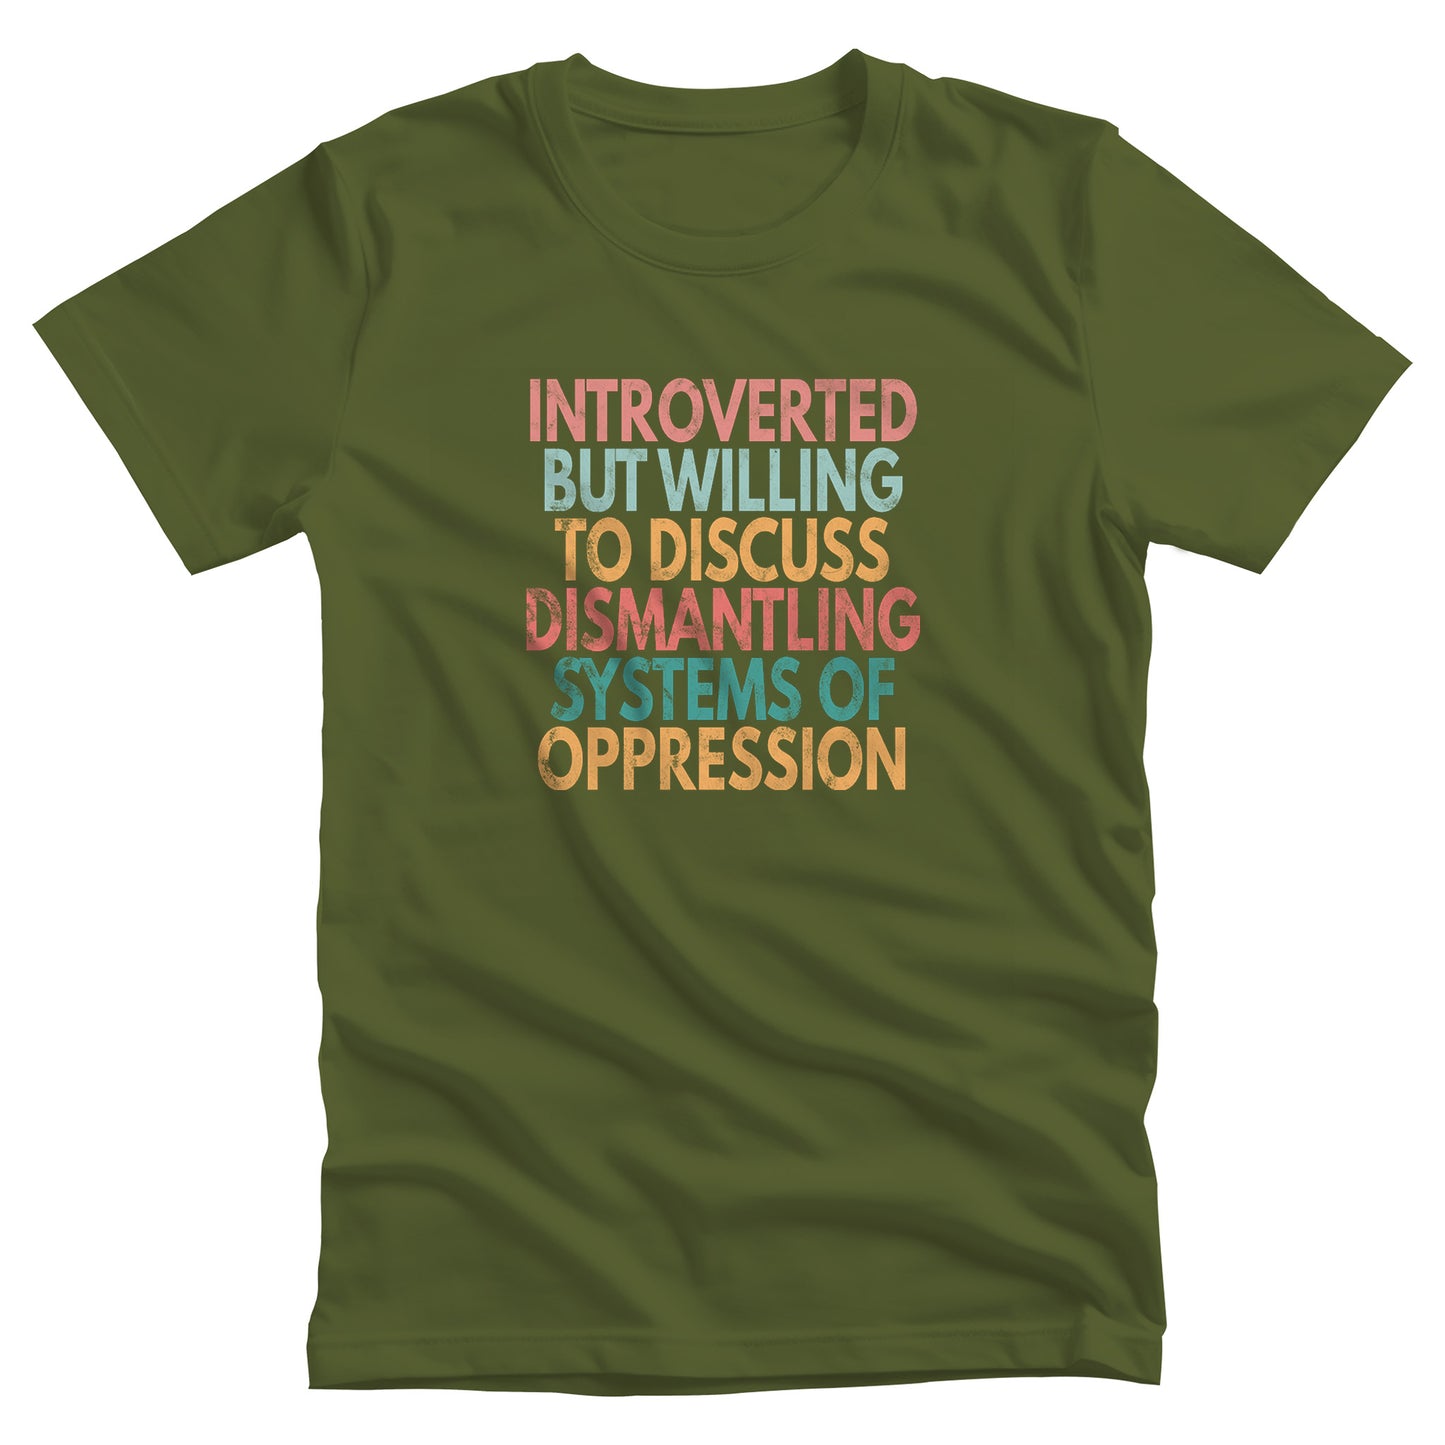 Olive color unisex t-shirt that says, “Introverted But Willing to Discuss Dismantling Systems of Oppression” spread out in 6 rows with each row a different color. “Introverted” is red/dark pink, “But Willing” is blue-green, “To Discuss” is yellow/orange, “Dismantling” is red/dark pink, “Systems of” is a dark blue-green, and “Oppression” is yellow/orange. The text has a slightly distressed look.